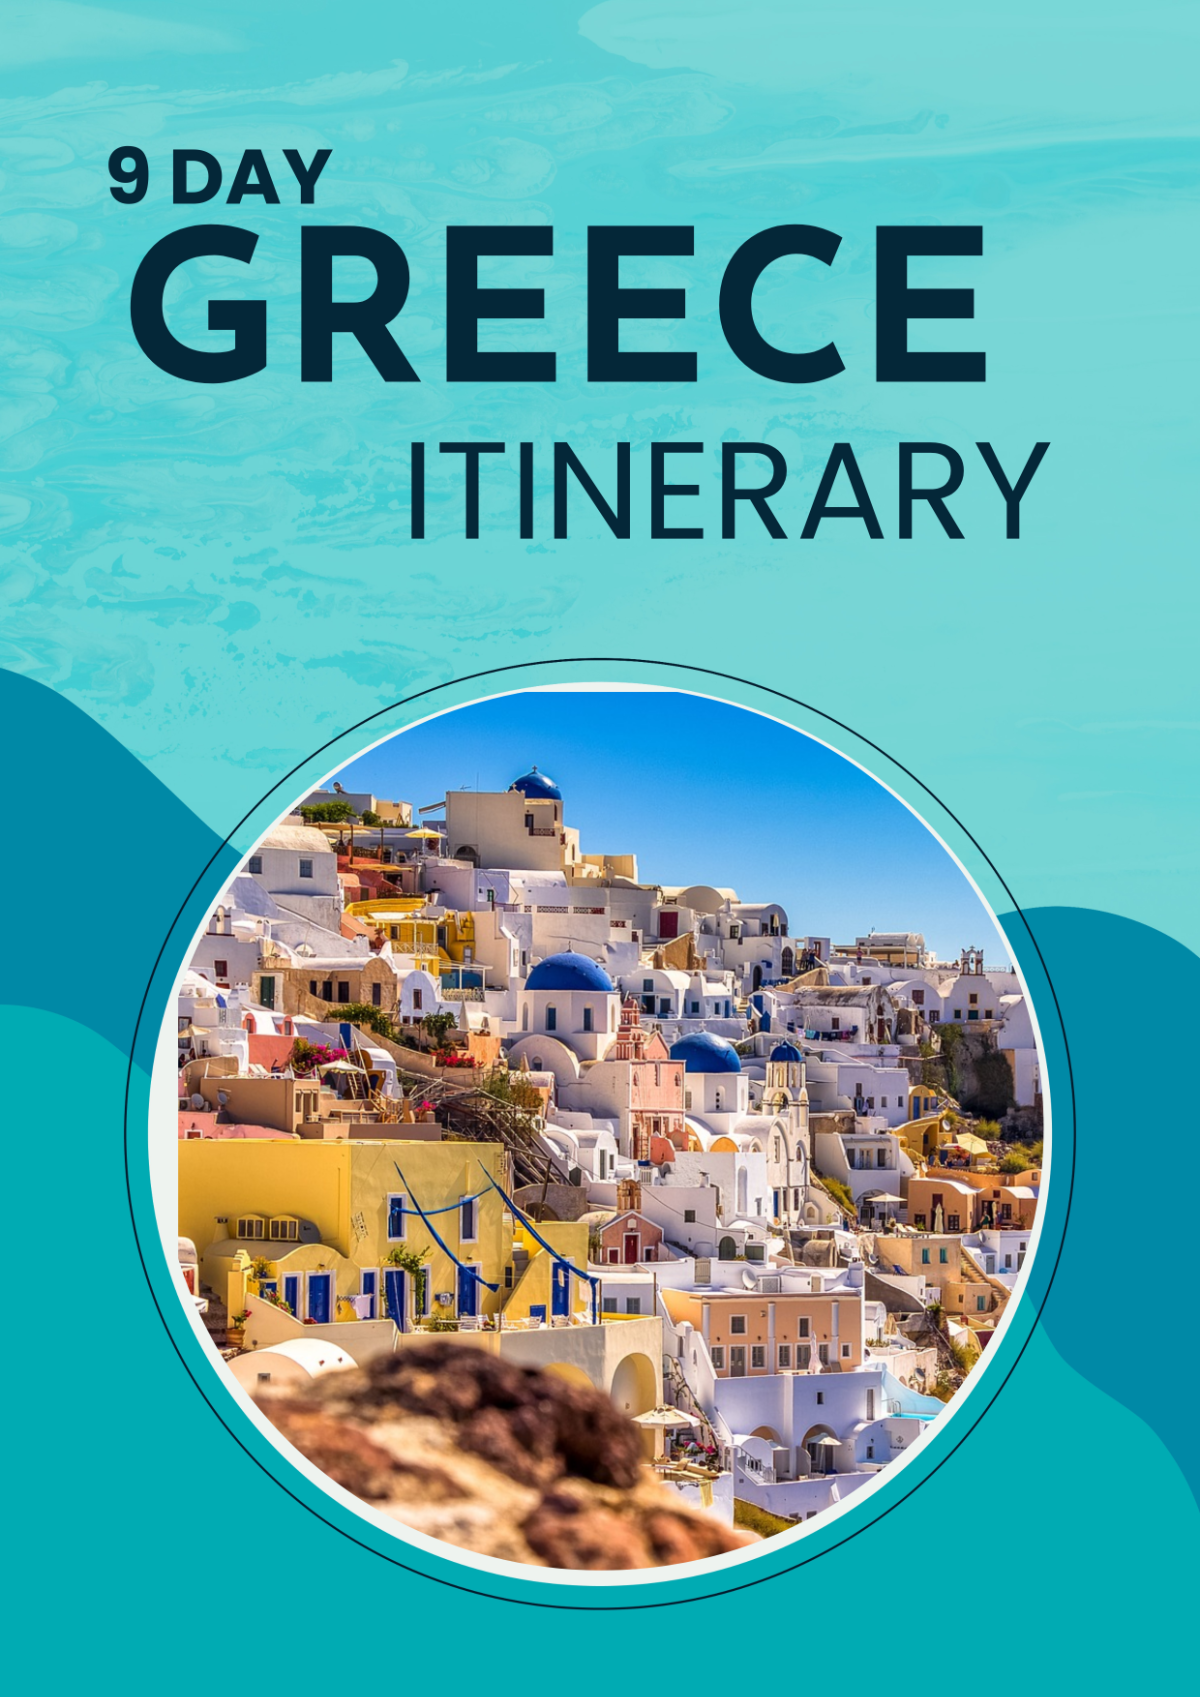 9 Day Greece Itinerary Template